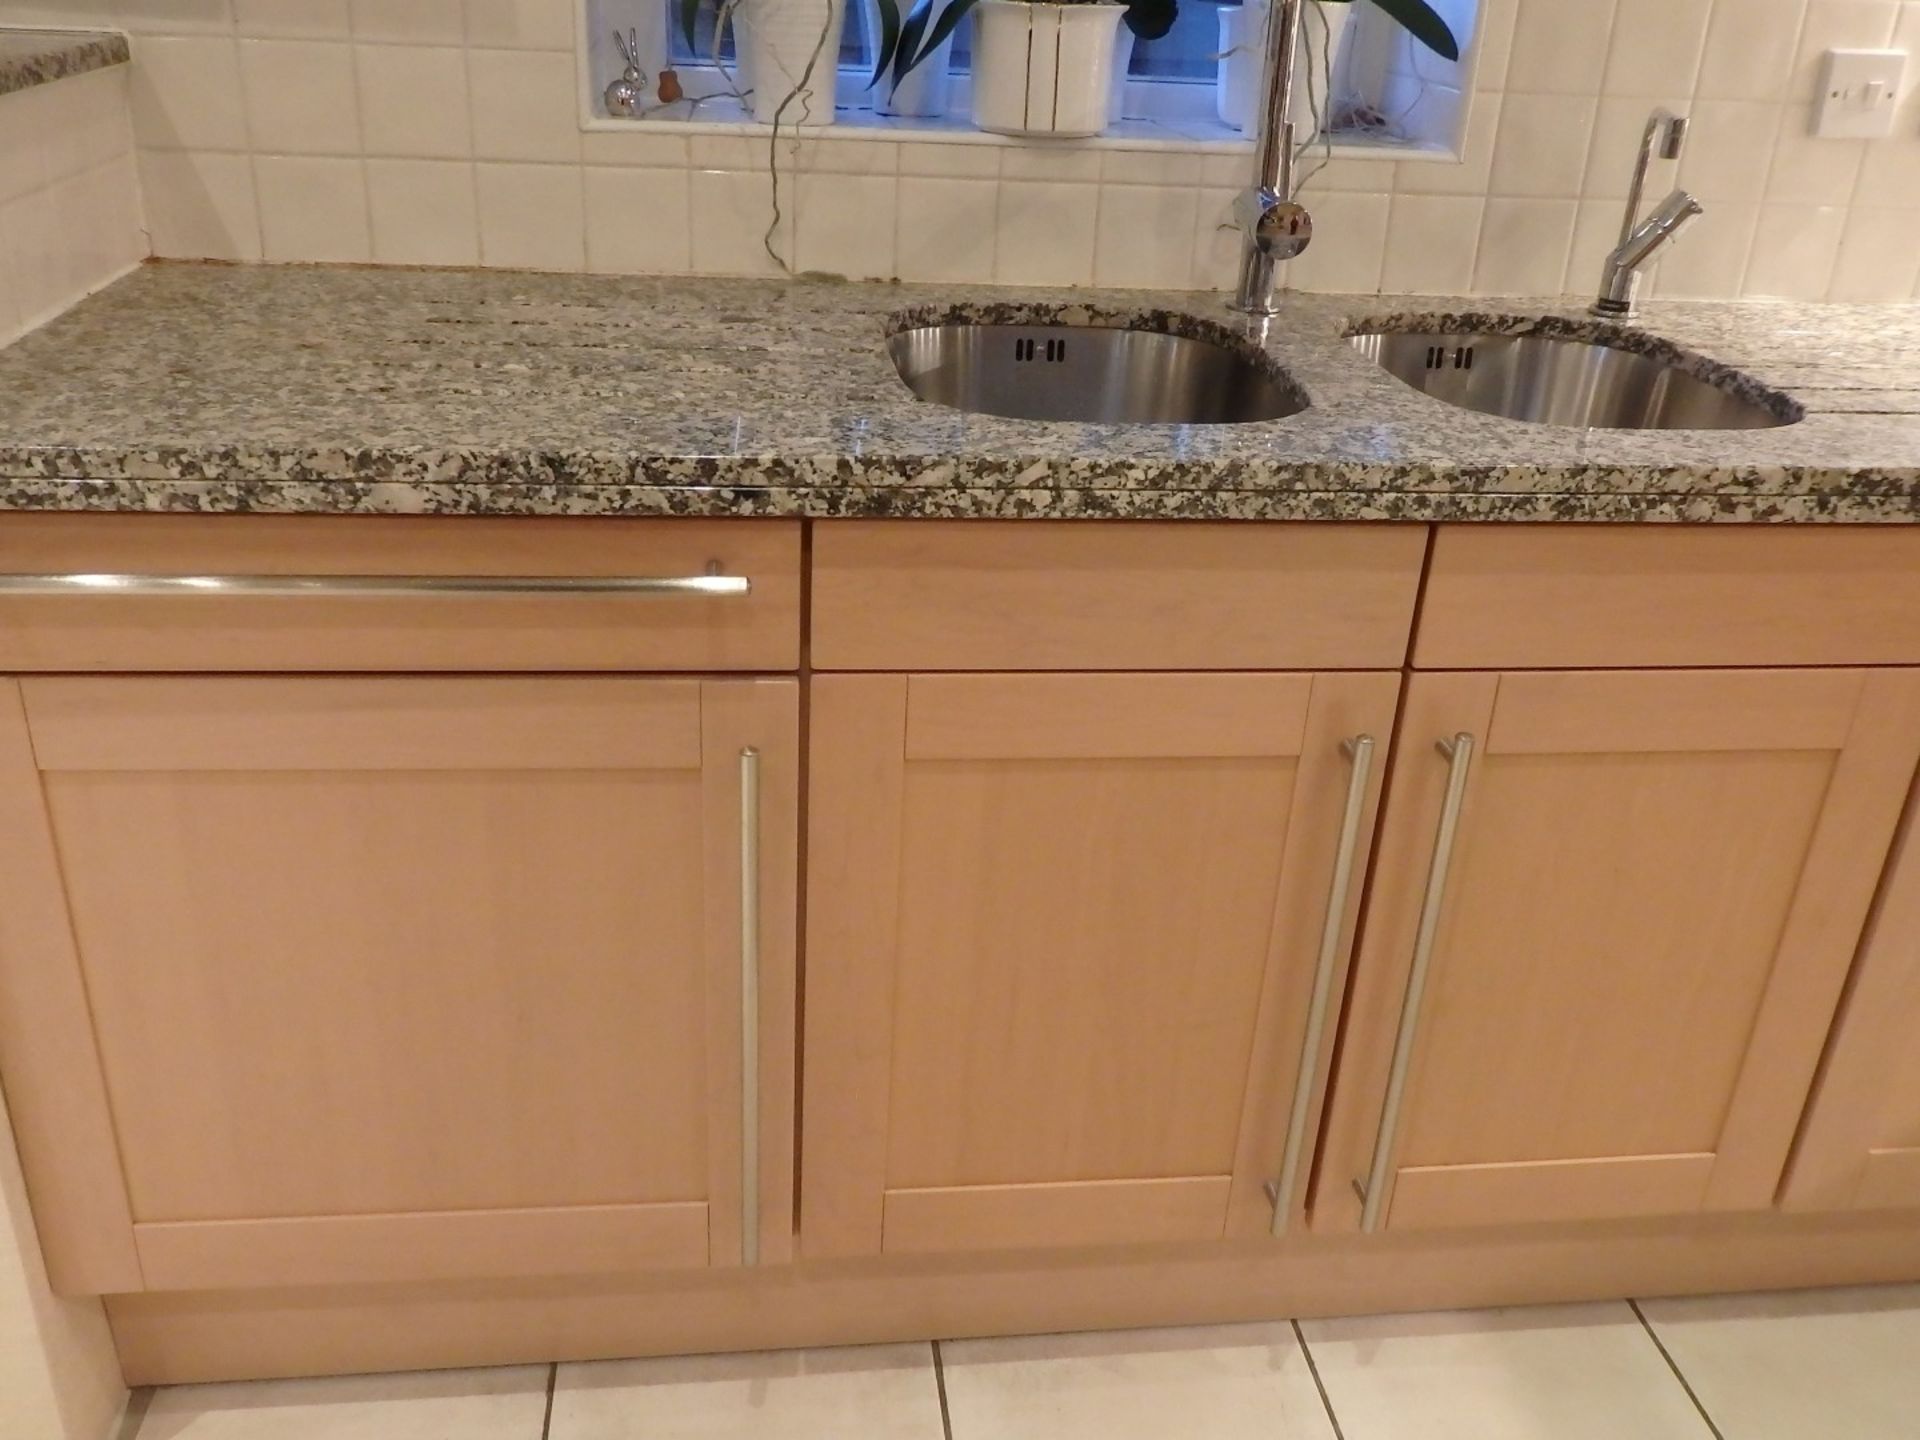 1 x Siematic Fitted Kitchen With Beech Shaker Style Doors, Granite Worktops, Central Island and - Image 19 of 148